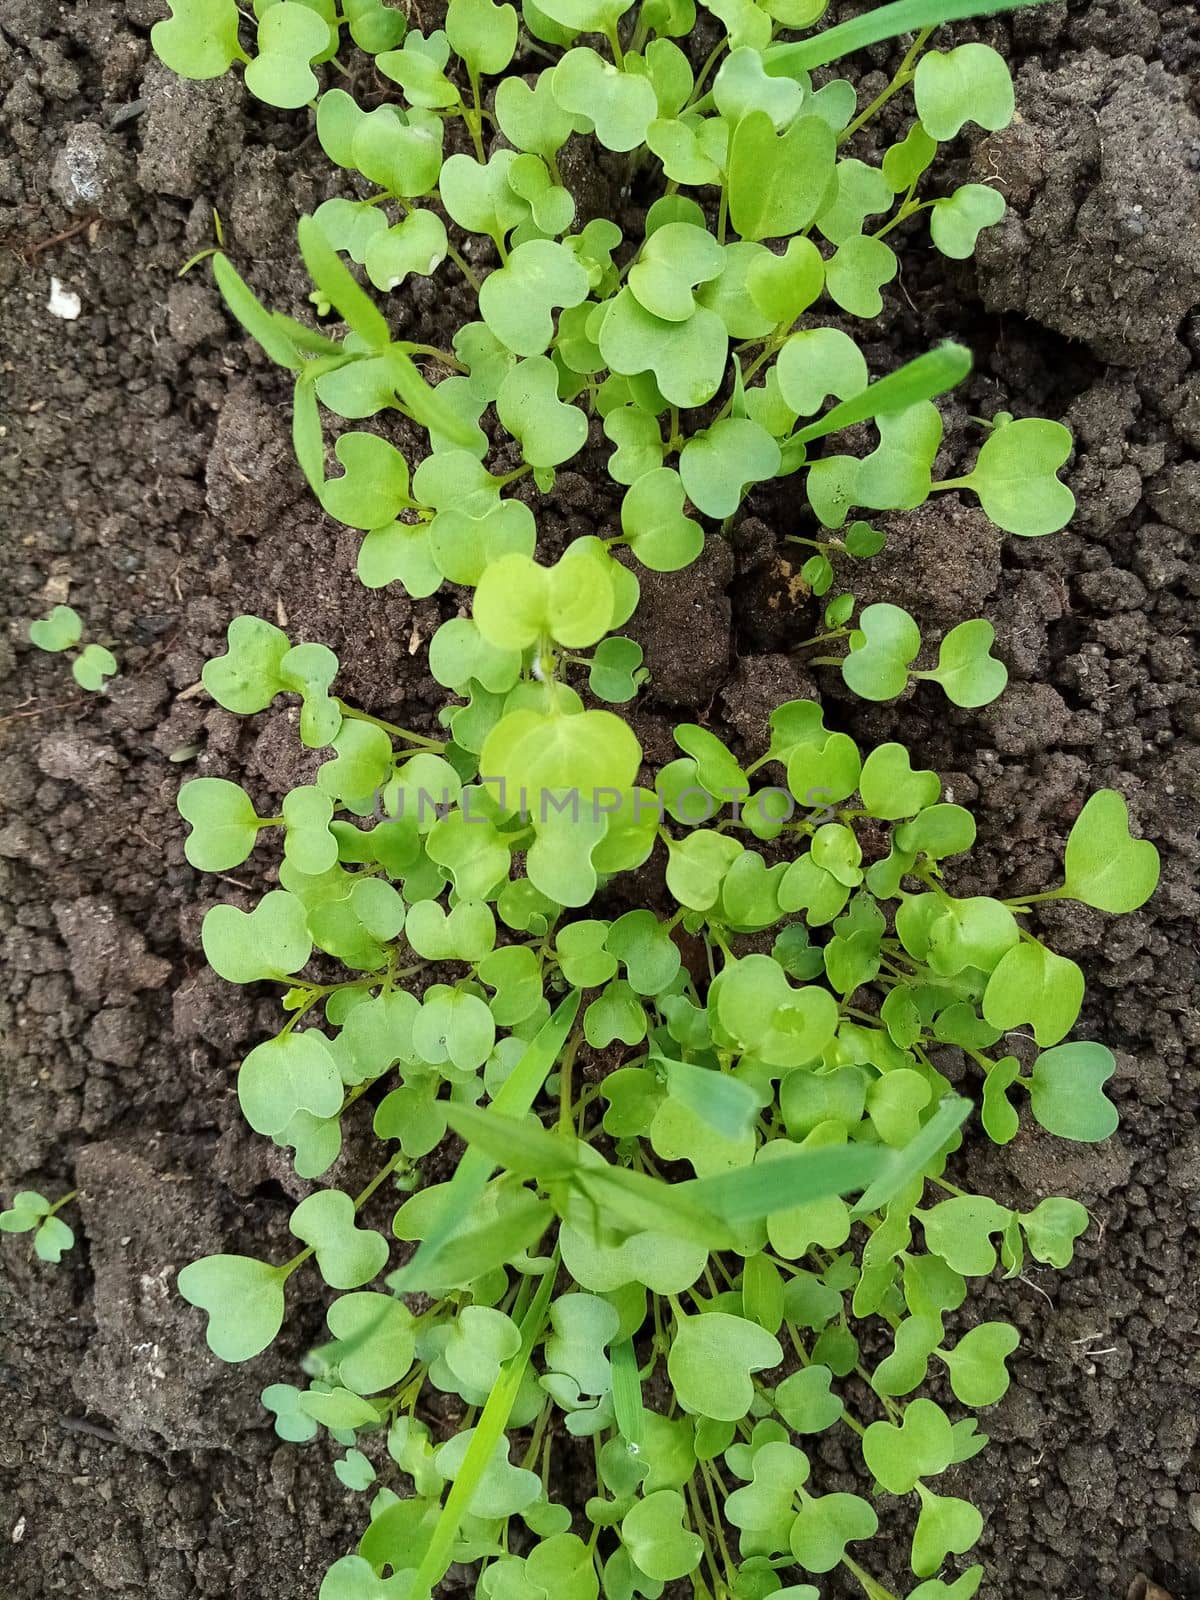 green seedlings of mustard, oats, vetch, sowing green manure in a greenhouse. High quality photo